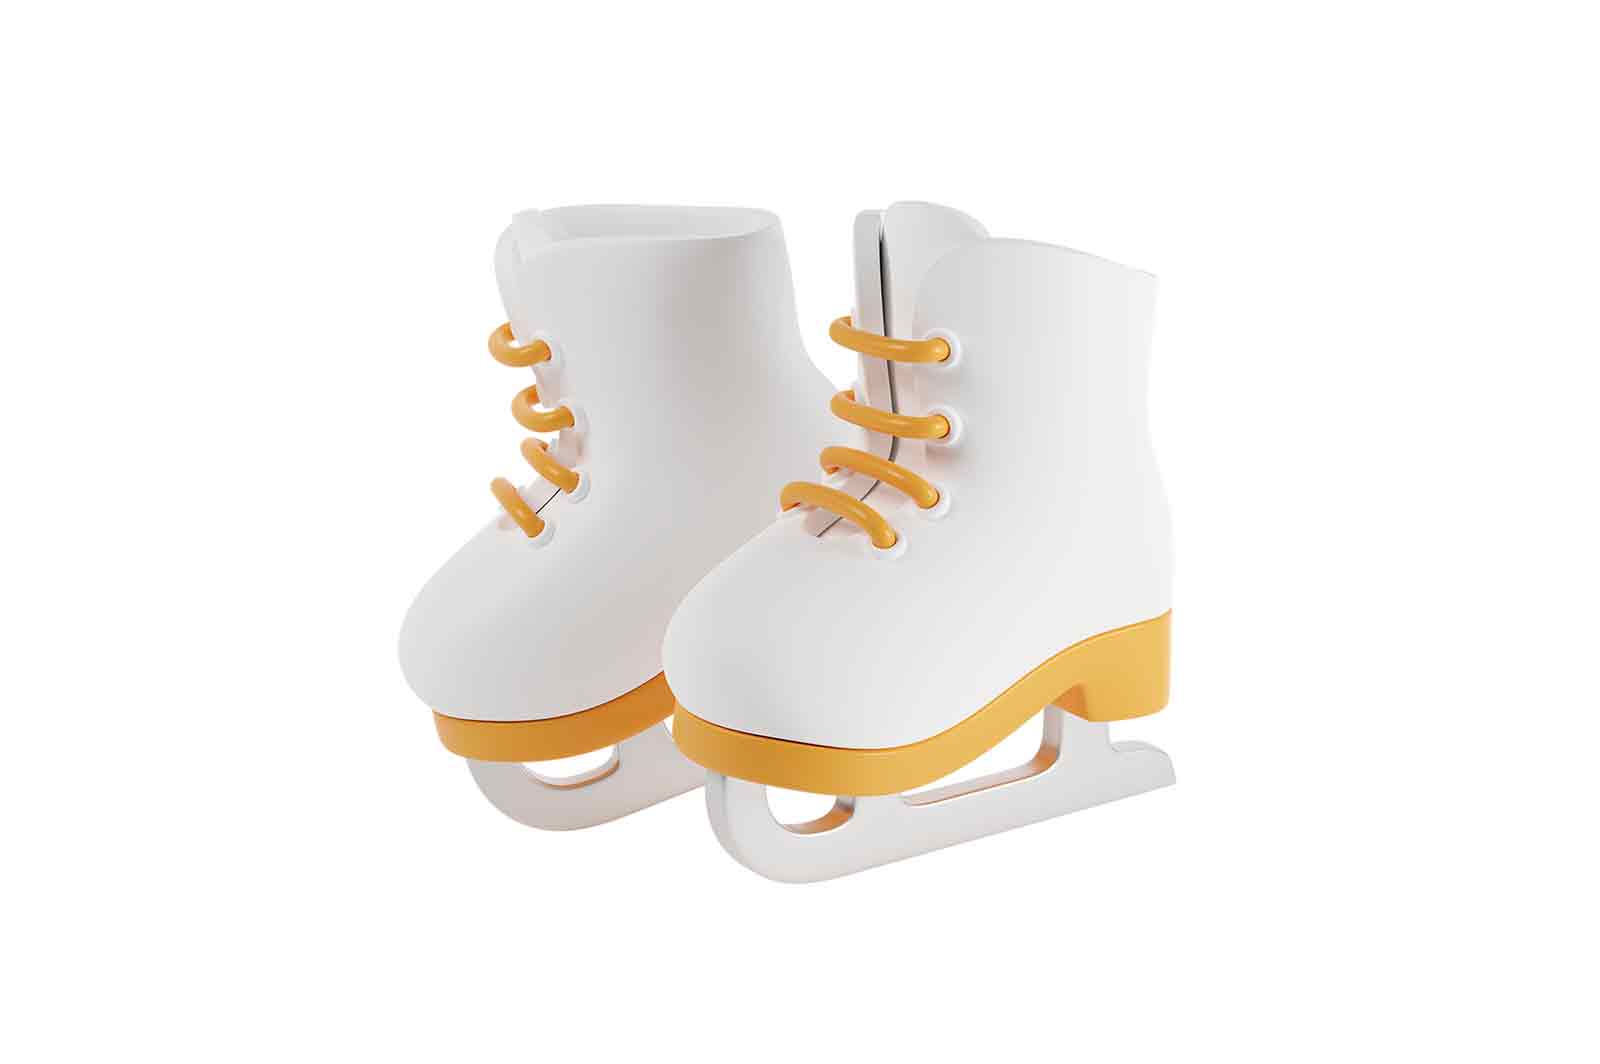 Pair of white figure skates 3d rendered illustration. Winter activity leisure concept. Sport female shoes for skating